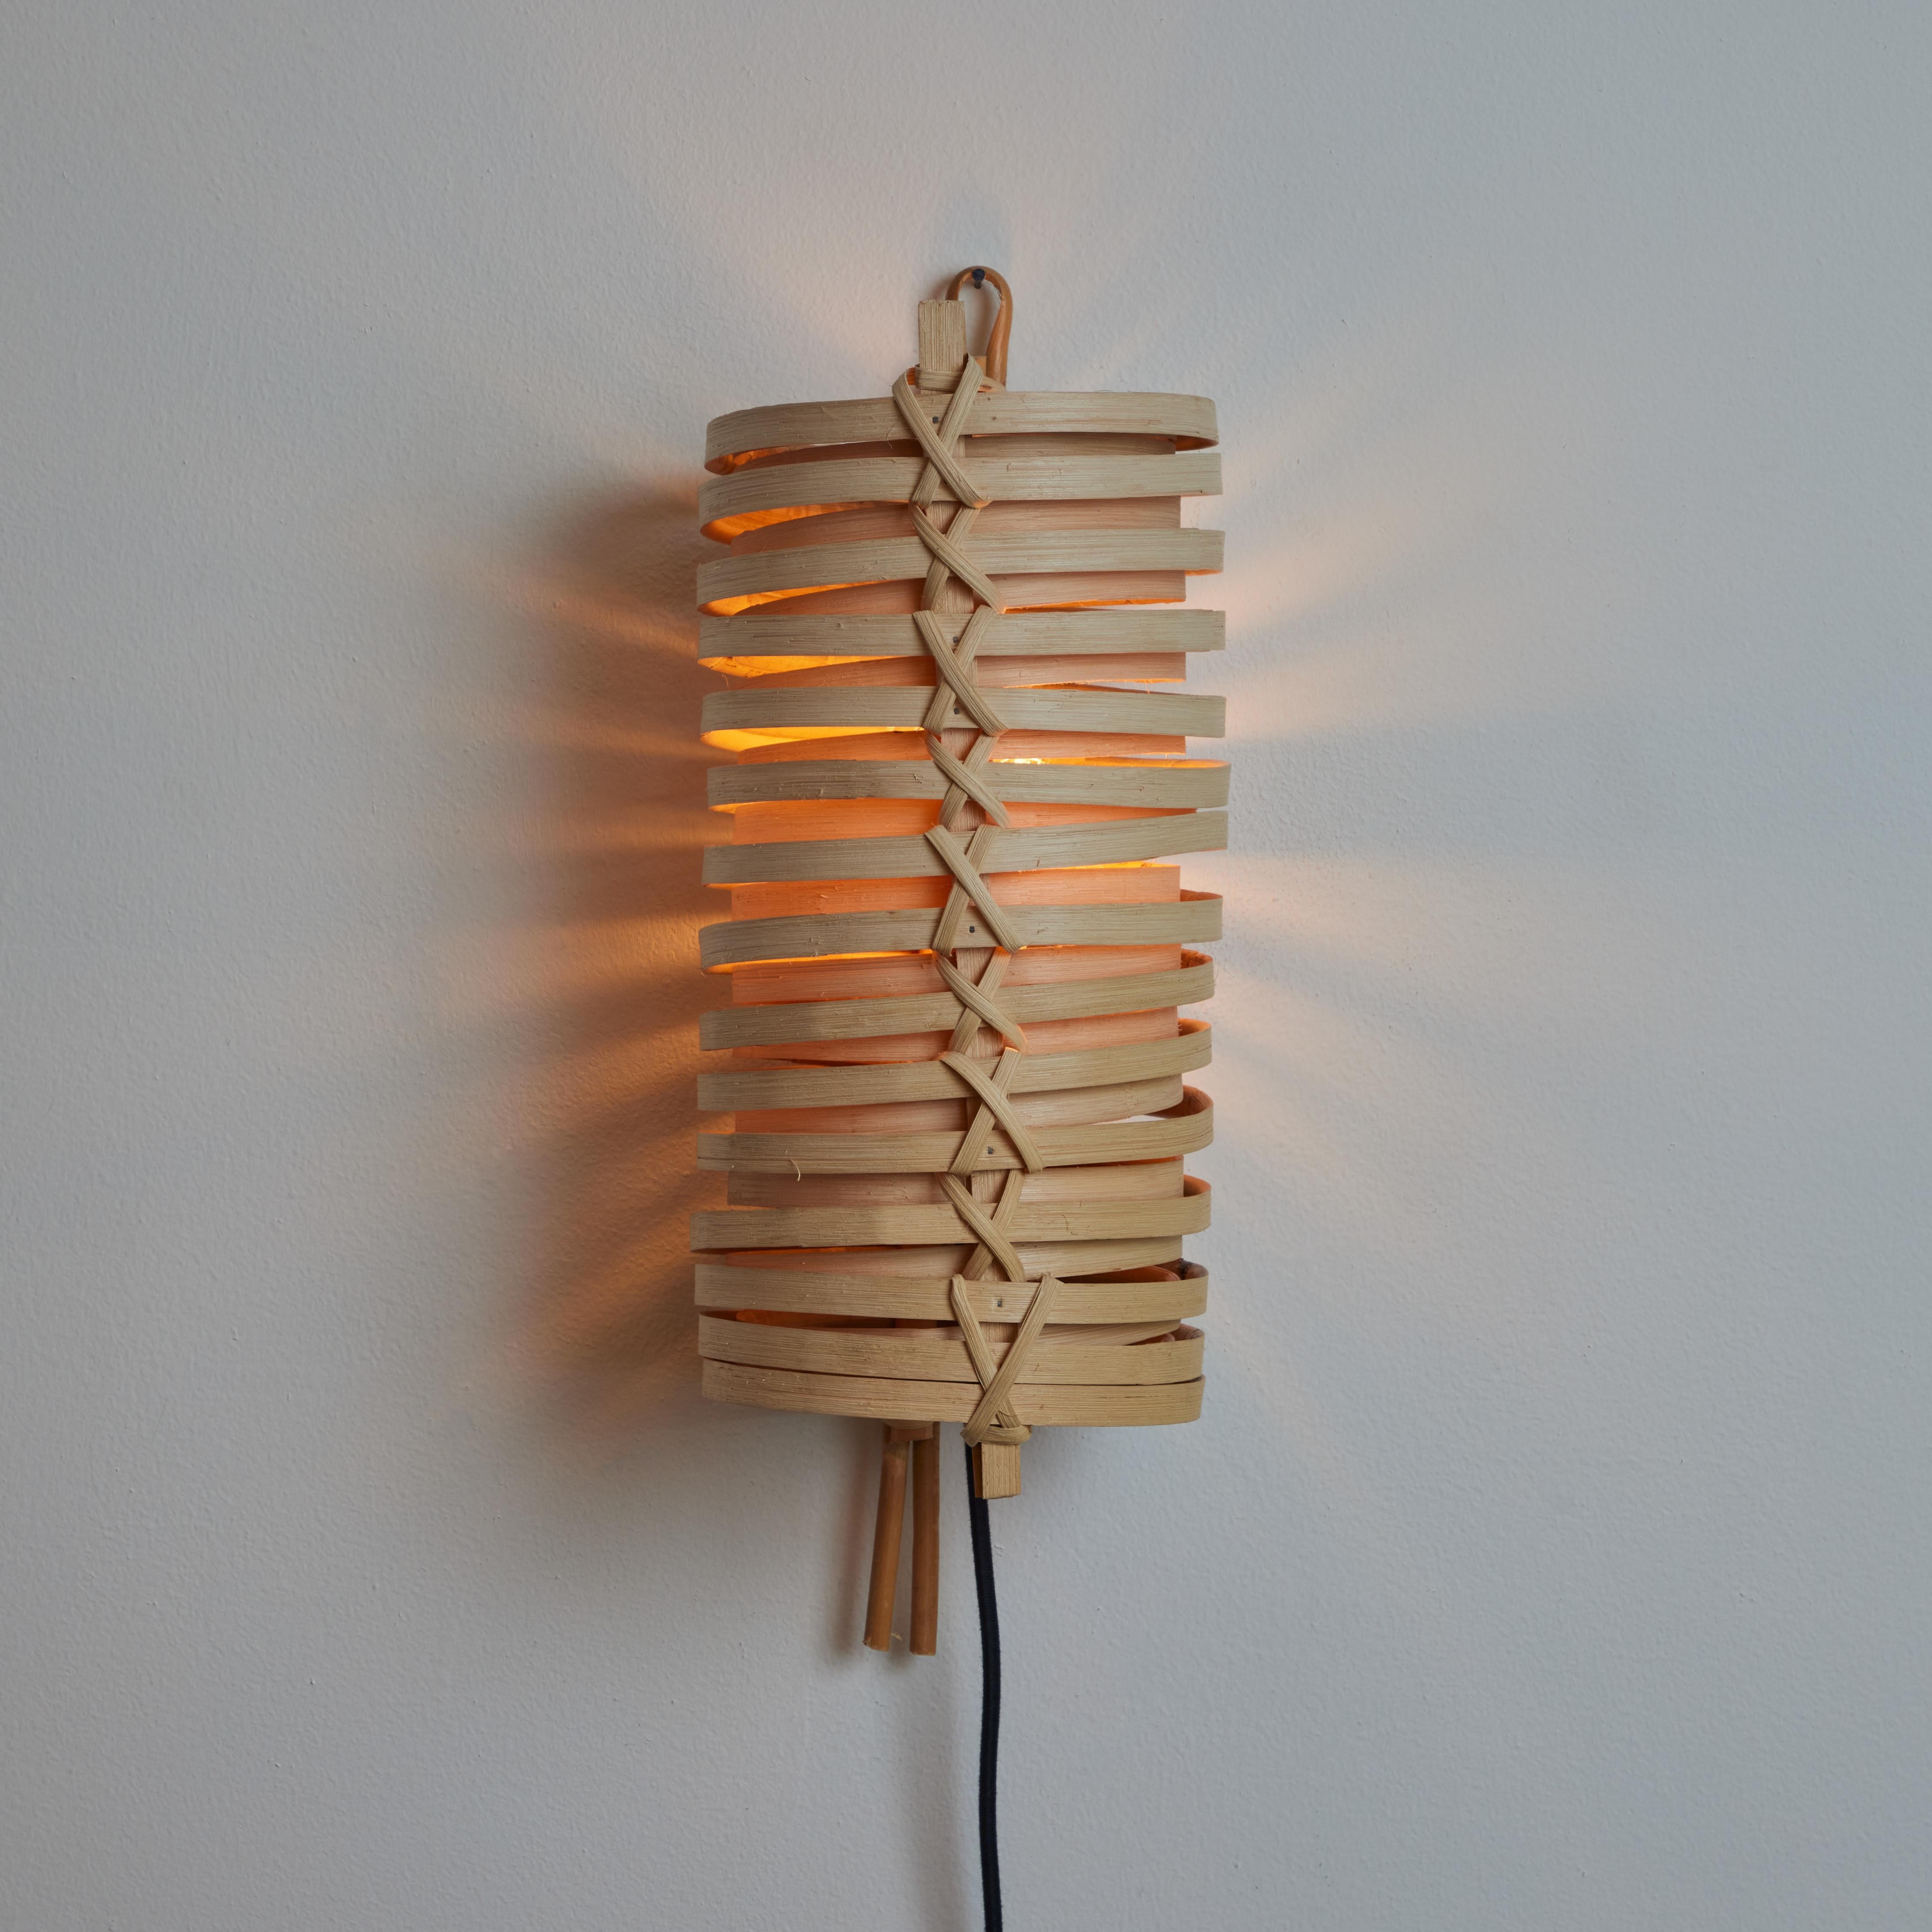 J.A. Coderch 'Junco' Rattan Cane Wall Lamp for Tunds For Sale 2